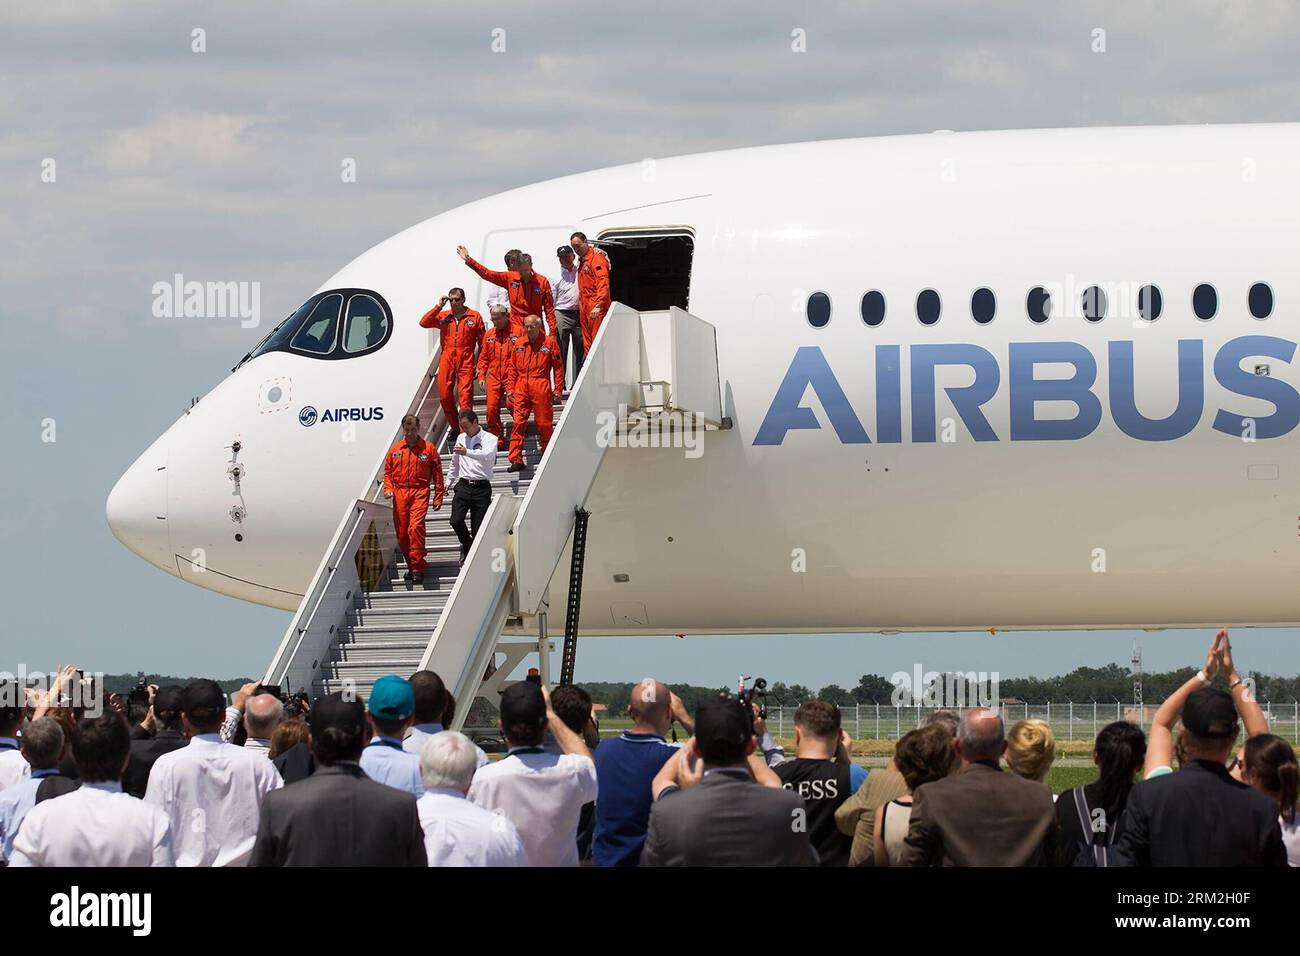 Bildnummer: 59834868  Datum: 14.06.2013  Copyright: imago/Xinhua (130614) -- TOULOUSE, June 14, 2013 (Xinhua) -- Crew members of Airbus s A350 XWB (eXtra Wide Body) plane walk out of the cabin after it landed at the Toulouse-Blagnac airport, southwestern France, on June 14, 2013. After its first four-hour test flight, the A350 XWB plane landed safely in southern France on Friday. (Xinhua/Chen Cheng) FRANCE-AIRBUS-A350 XWB-TEST FLIGHT PUBLICATIONxNOTxINxCHN Wirtschaft Verkehr Luftfahrt Testflug Airbus A 350 premiumd xbs x0x 2013 quer      59834868 Date 14 06 2013 Copyright Imago XINHUA  Toulous Stock Photo